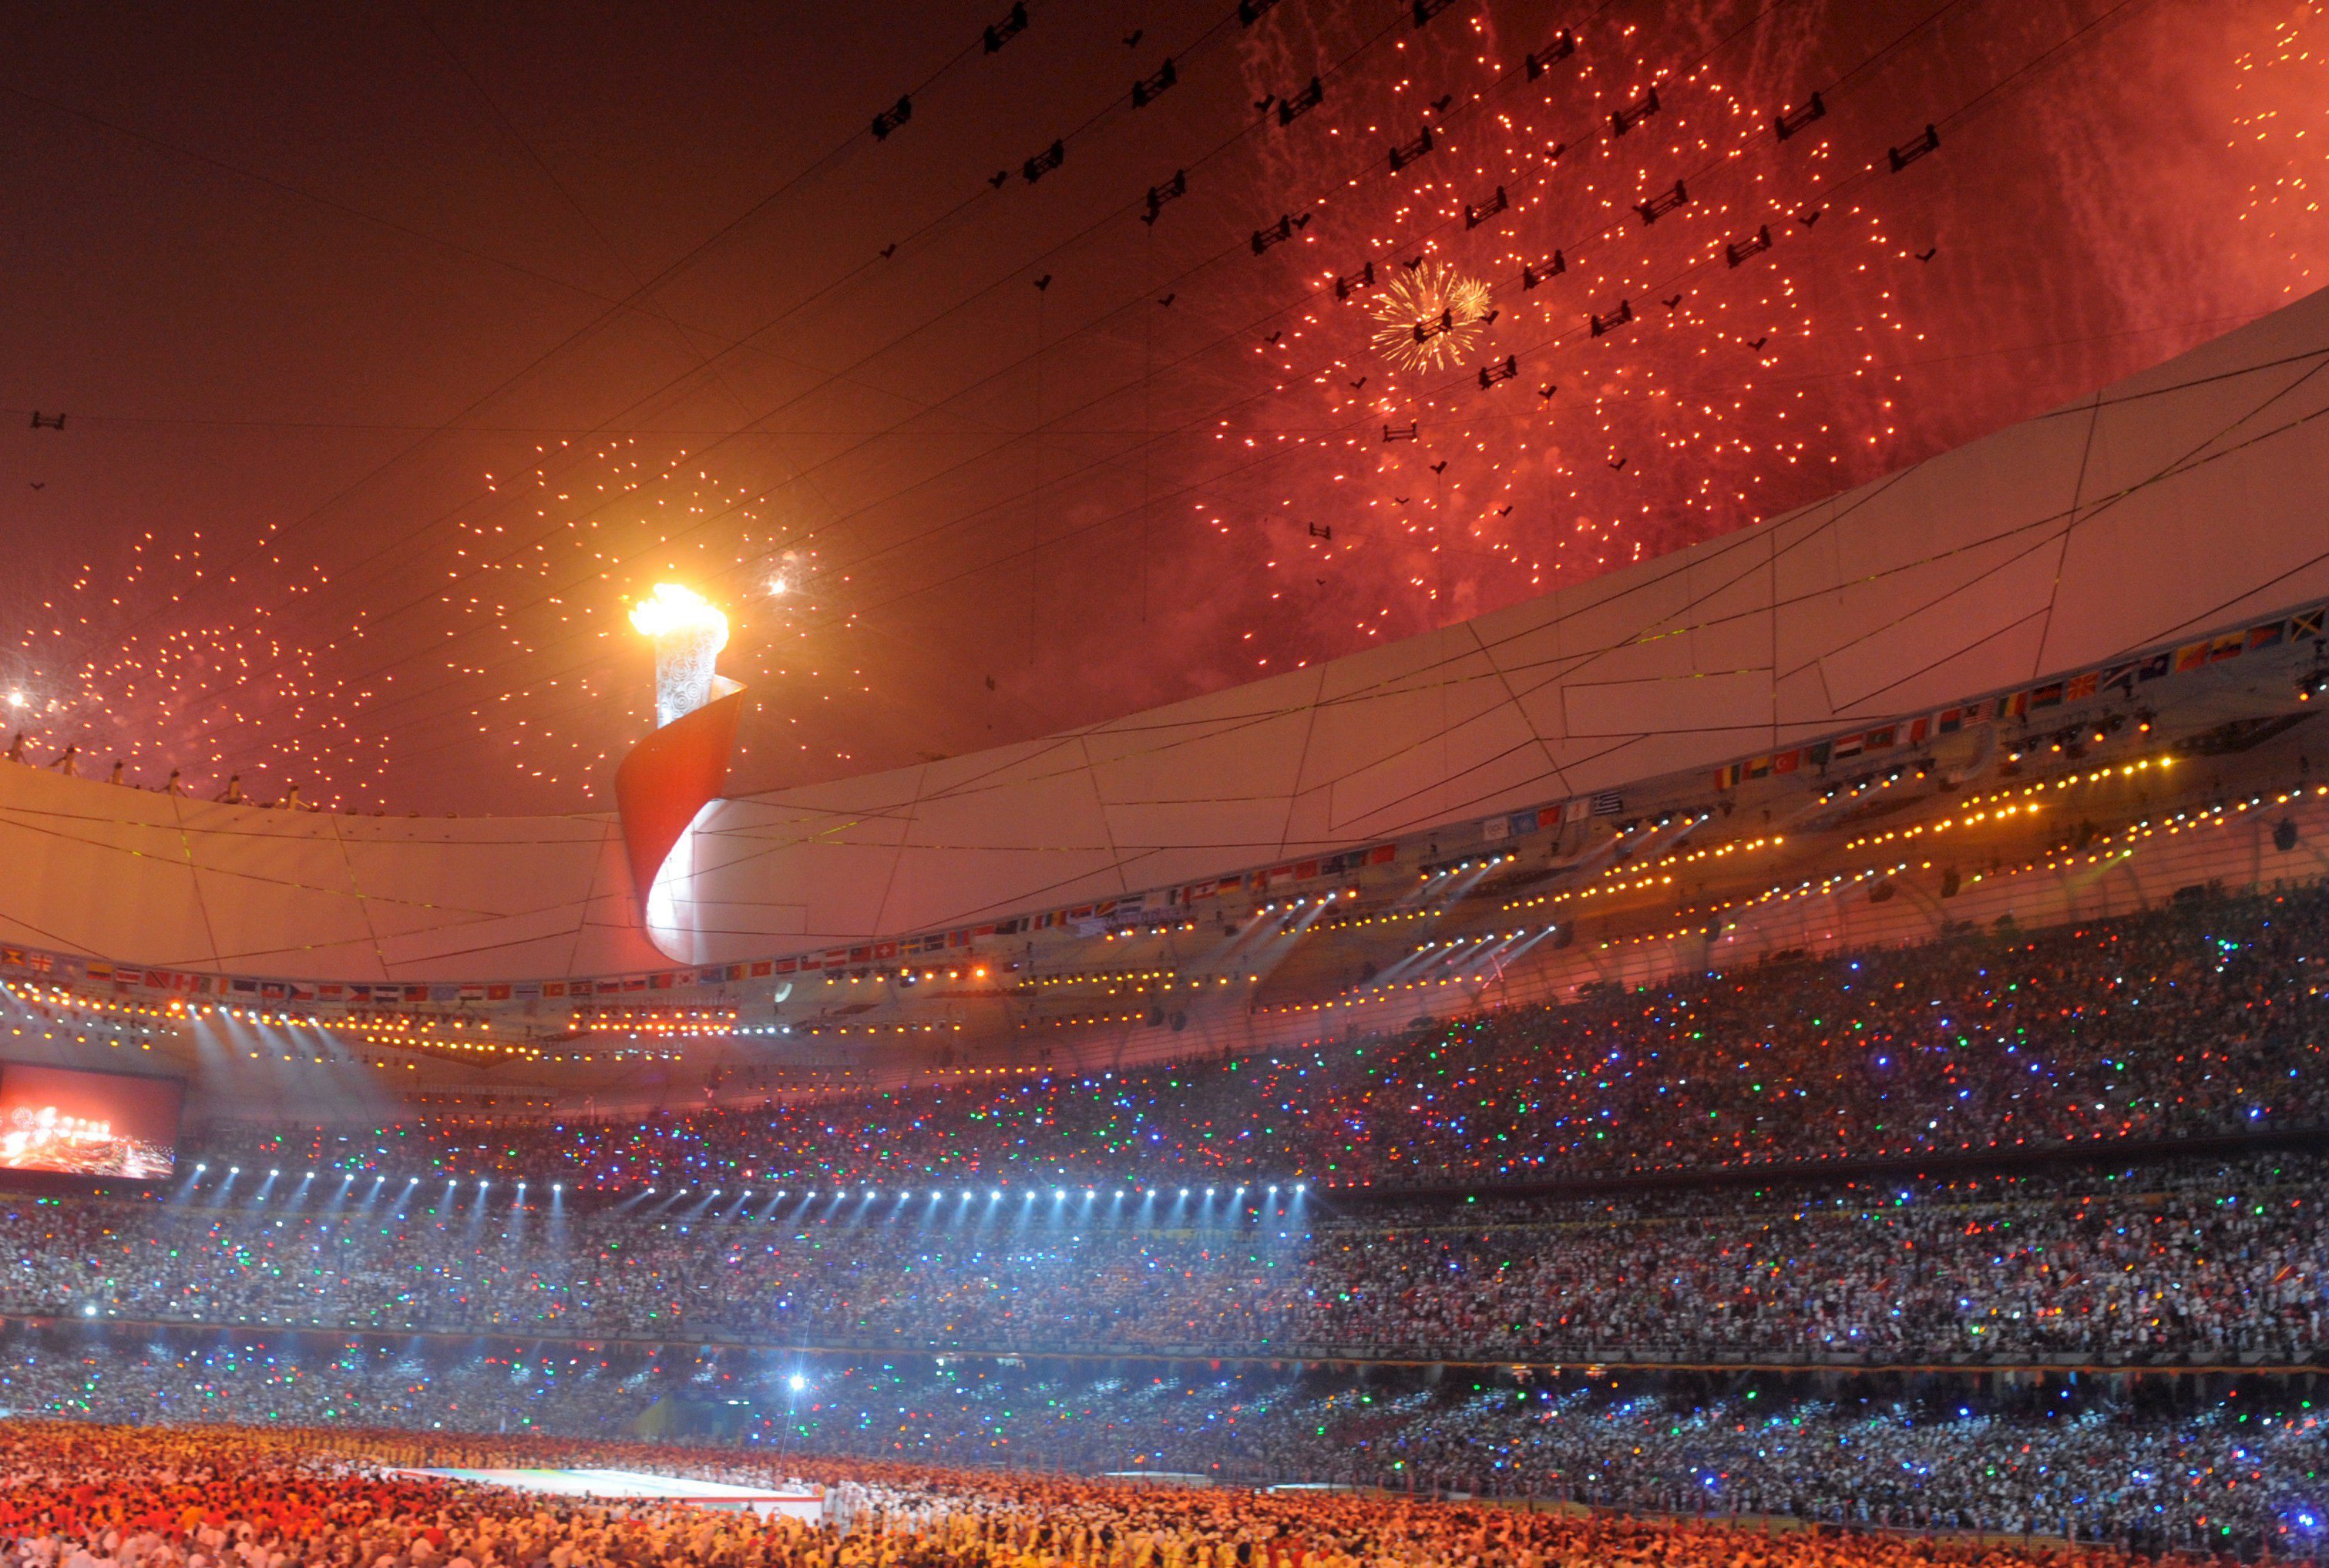 Fireworks light up behind the Olympic Flame during the Opening Ceremony of the Beijing 2008 Olympic Games.